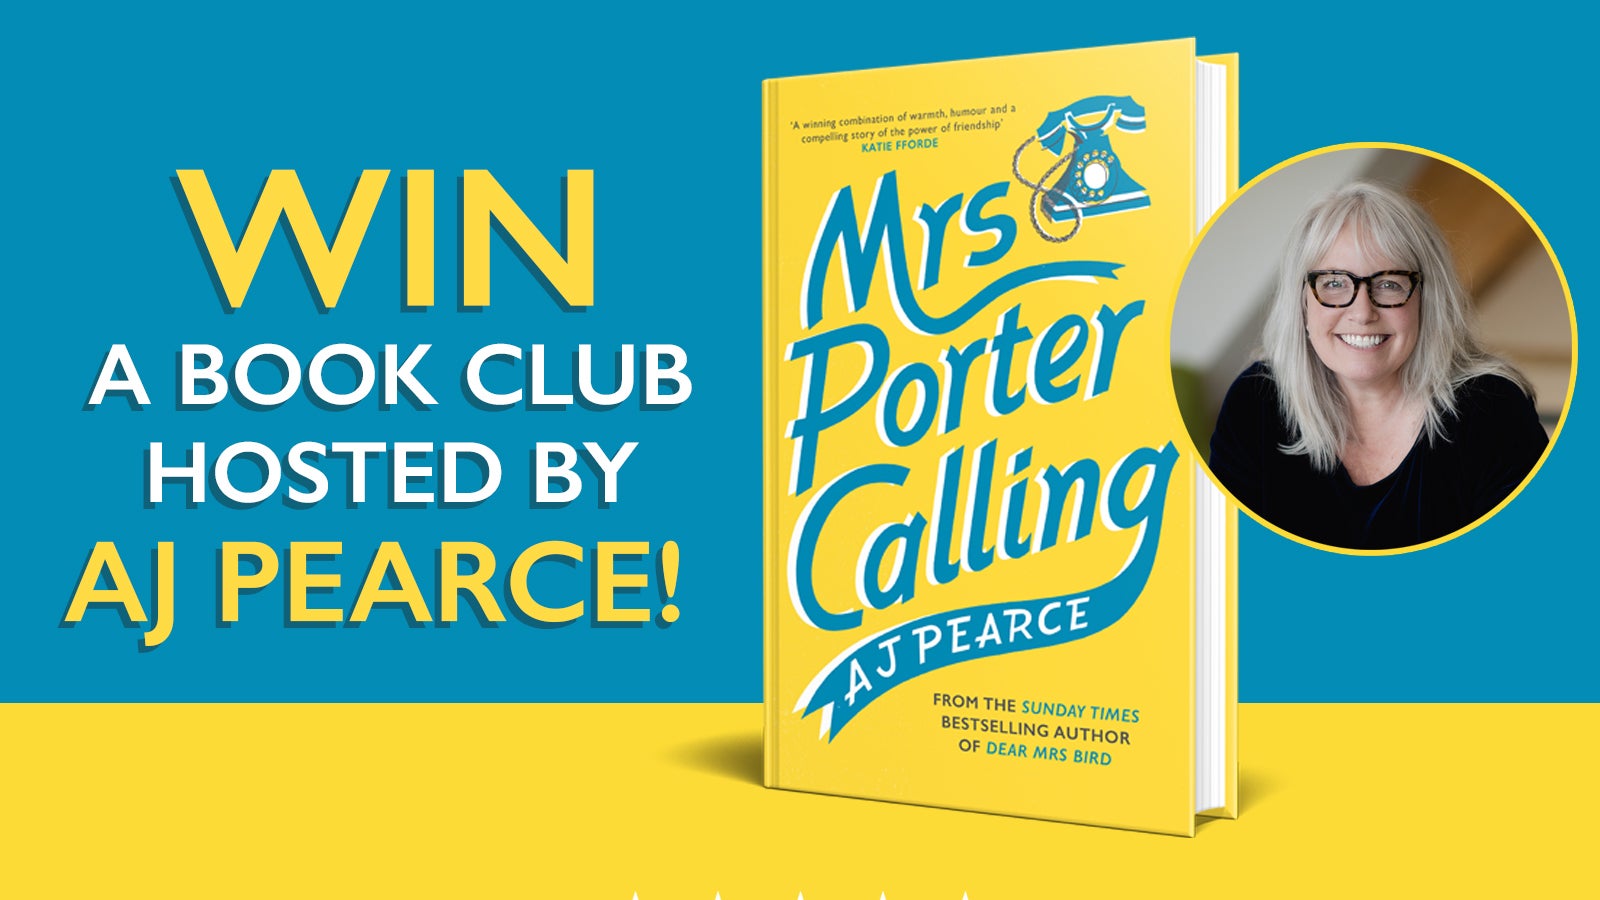 Win a Book Club hosted by AJ Pearce